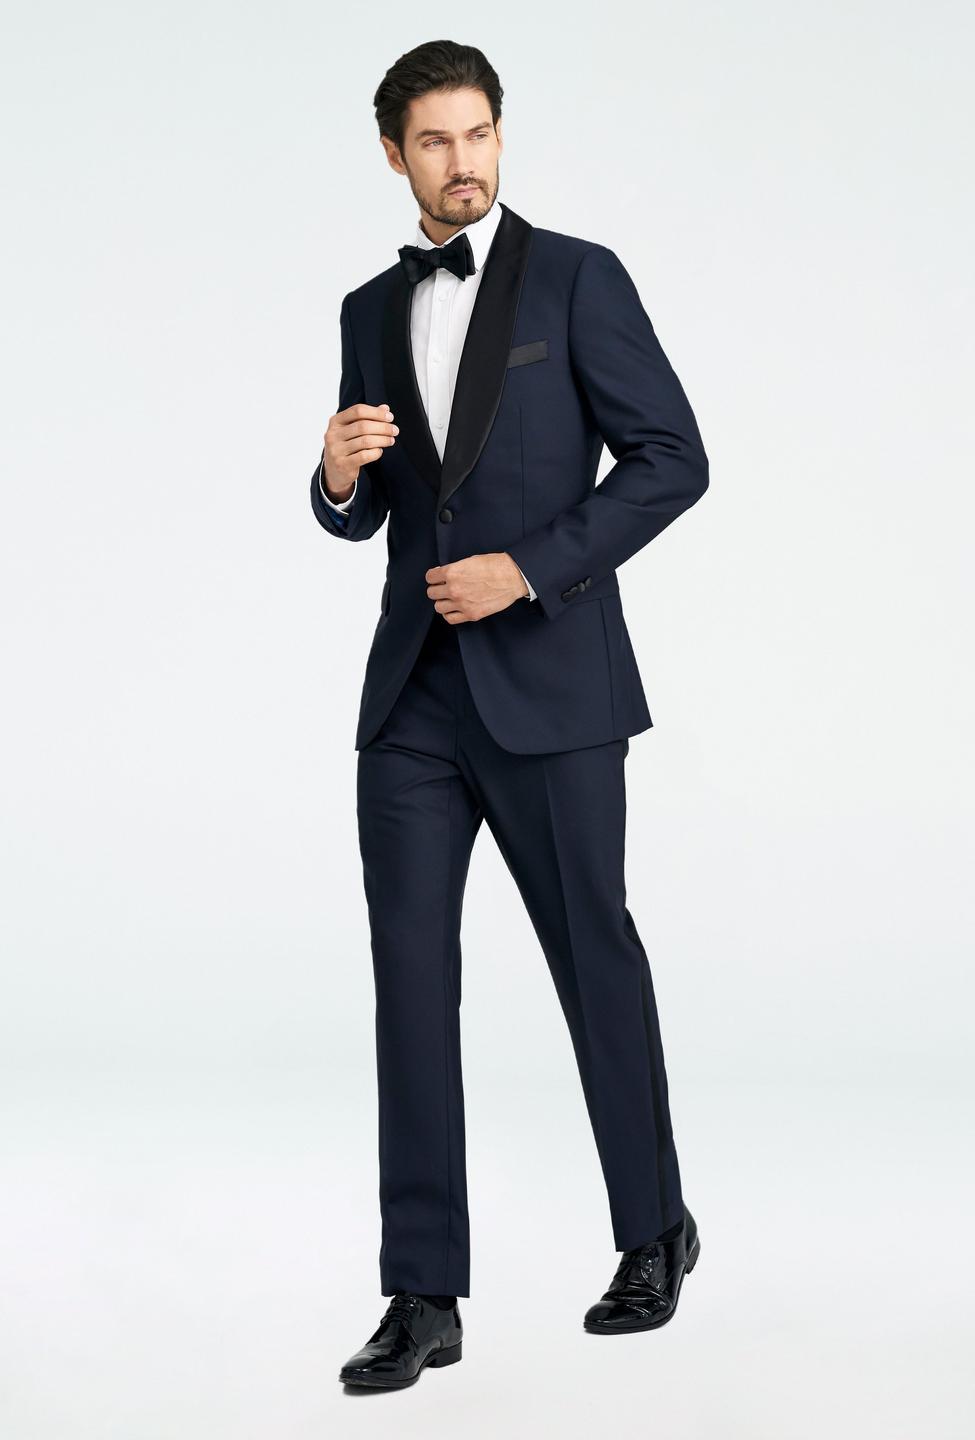 Black suit - Hampton Solid Design from Tuxedo Indochino Collection